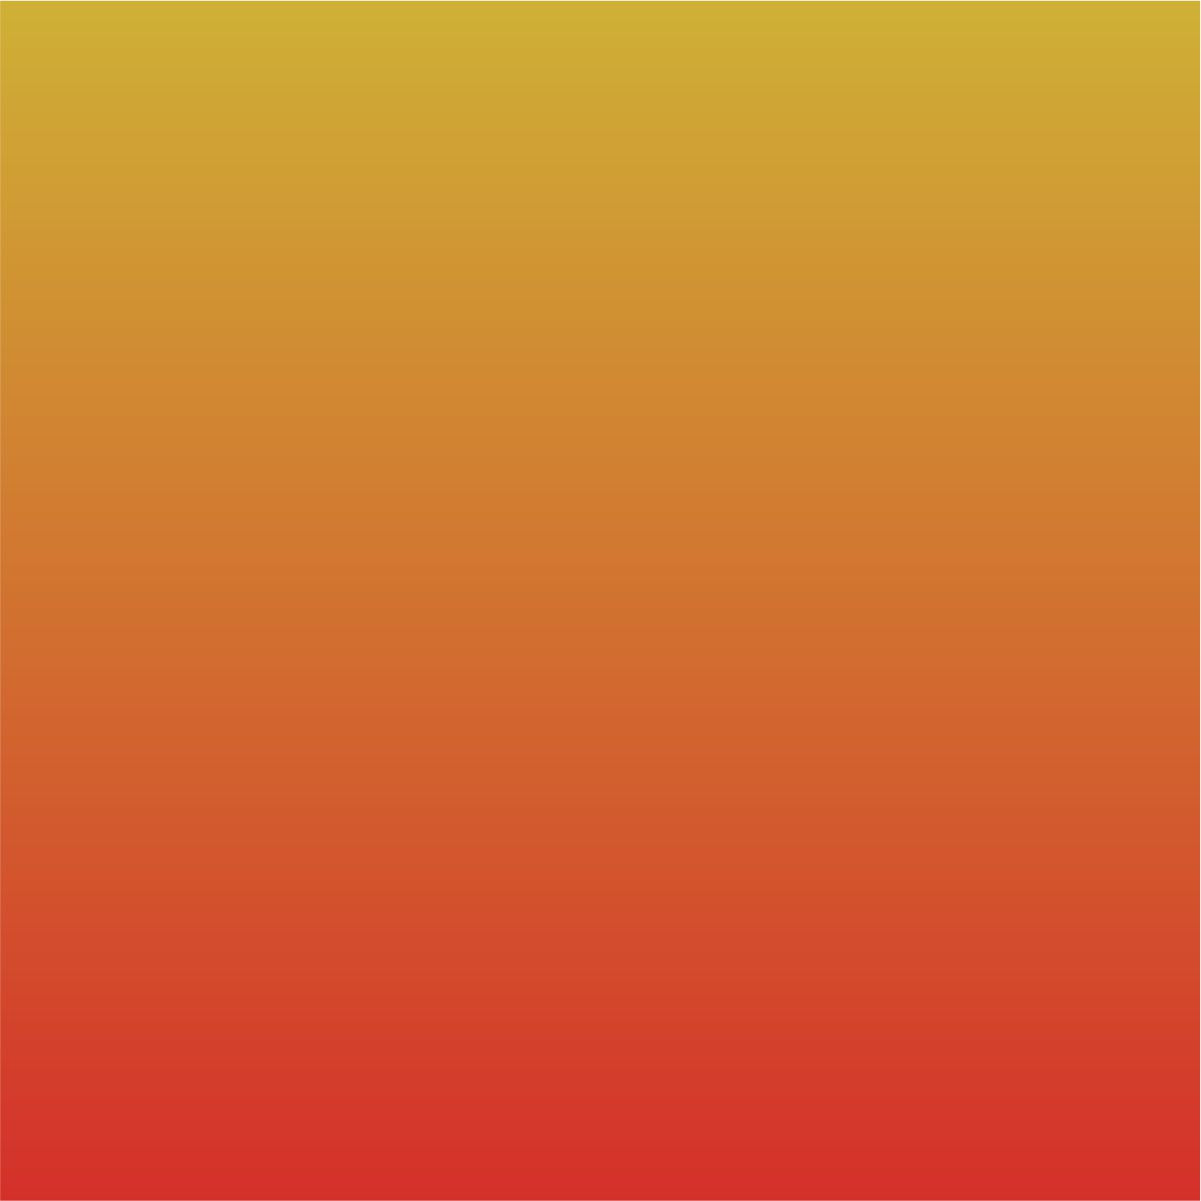 Color Changing Hot Red Specialty PSV 12in x 15in (Permanent Adhesive Vinyl) CLEARANCE